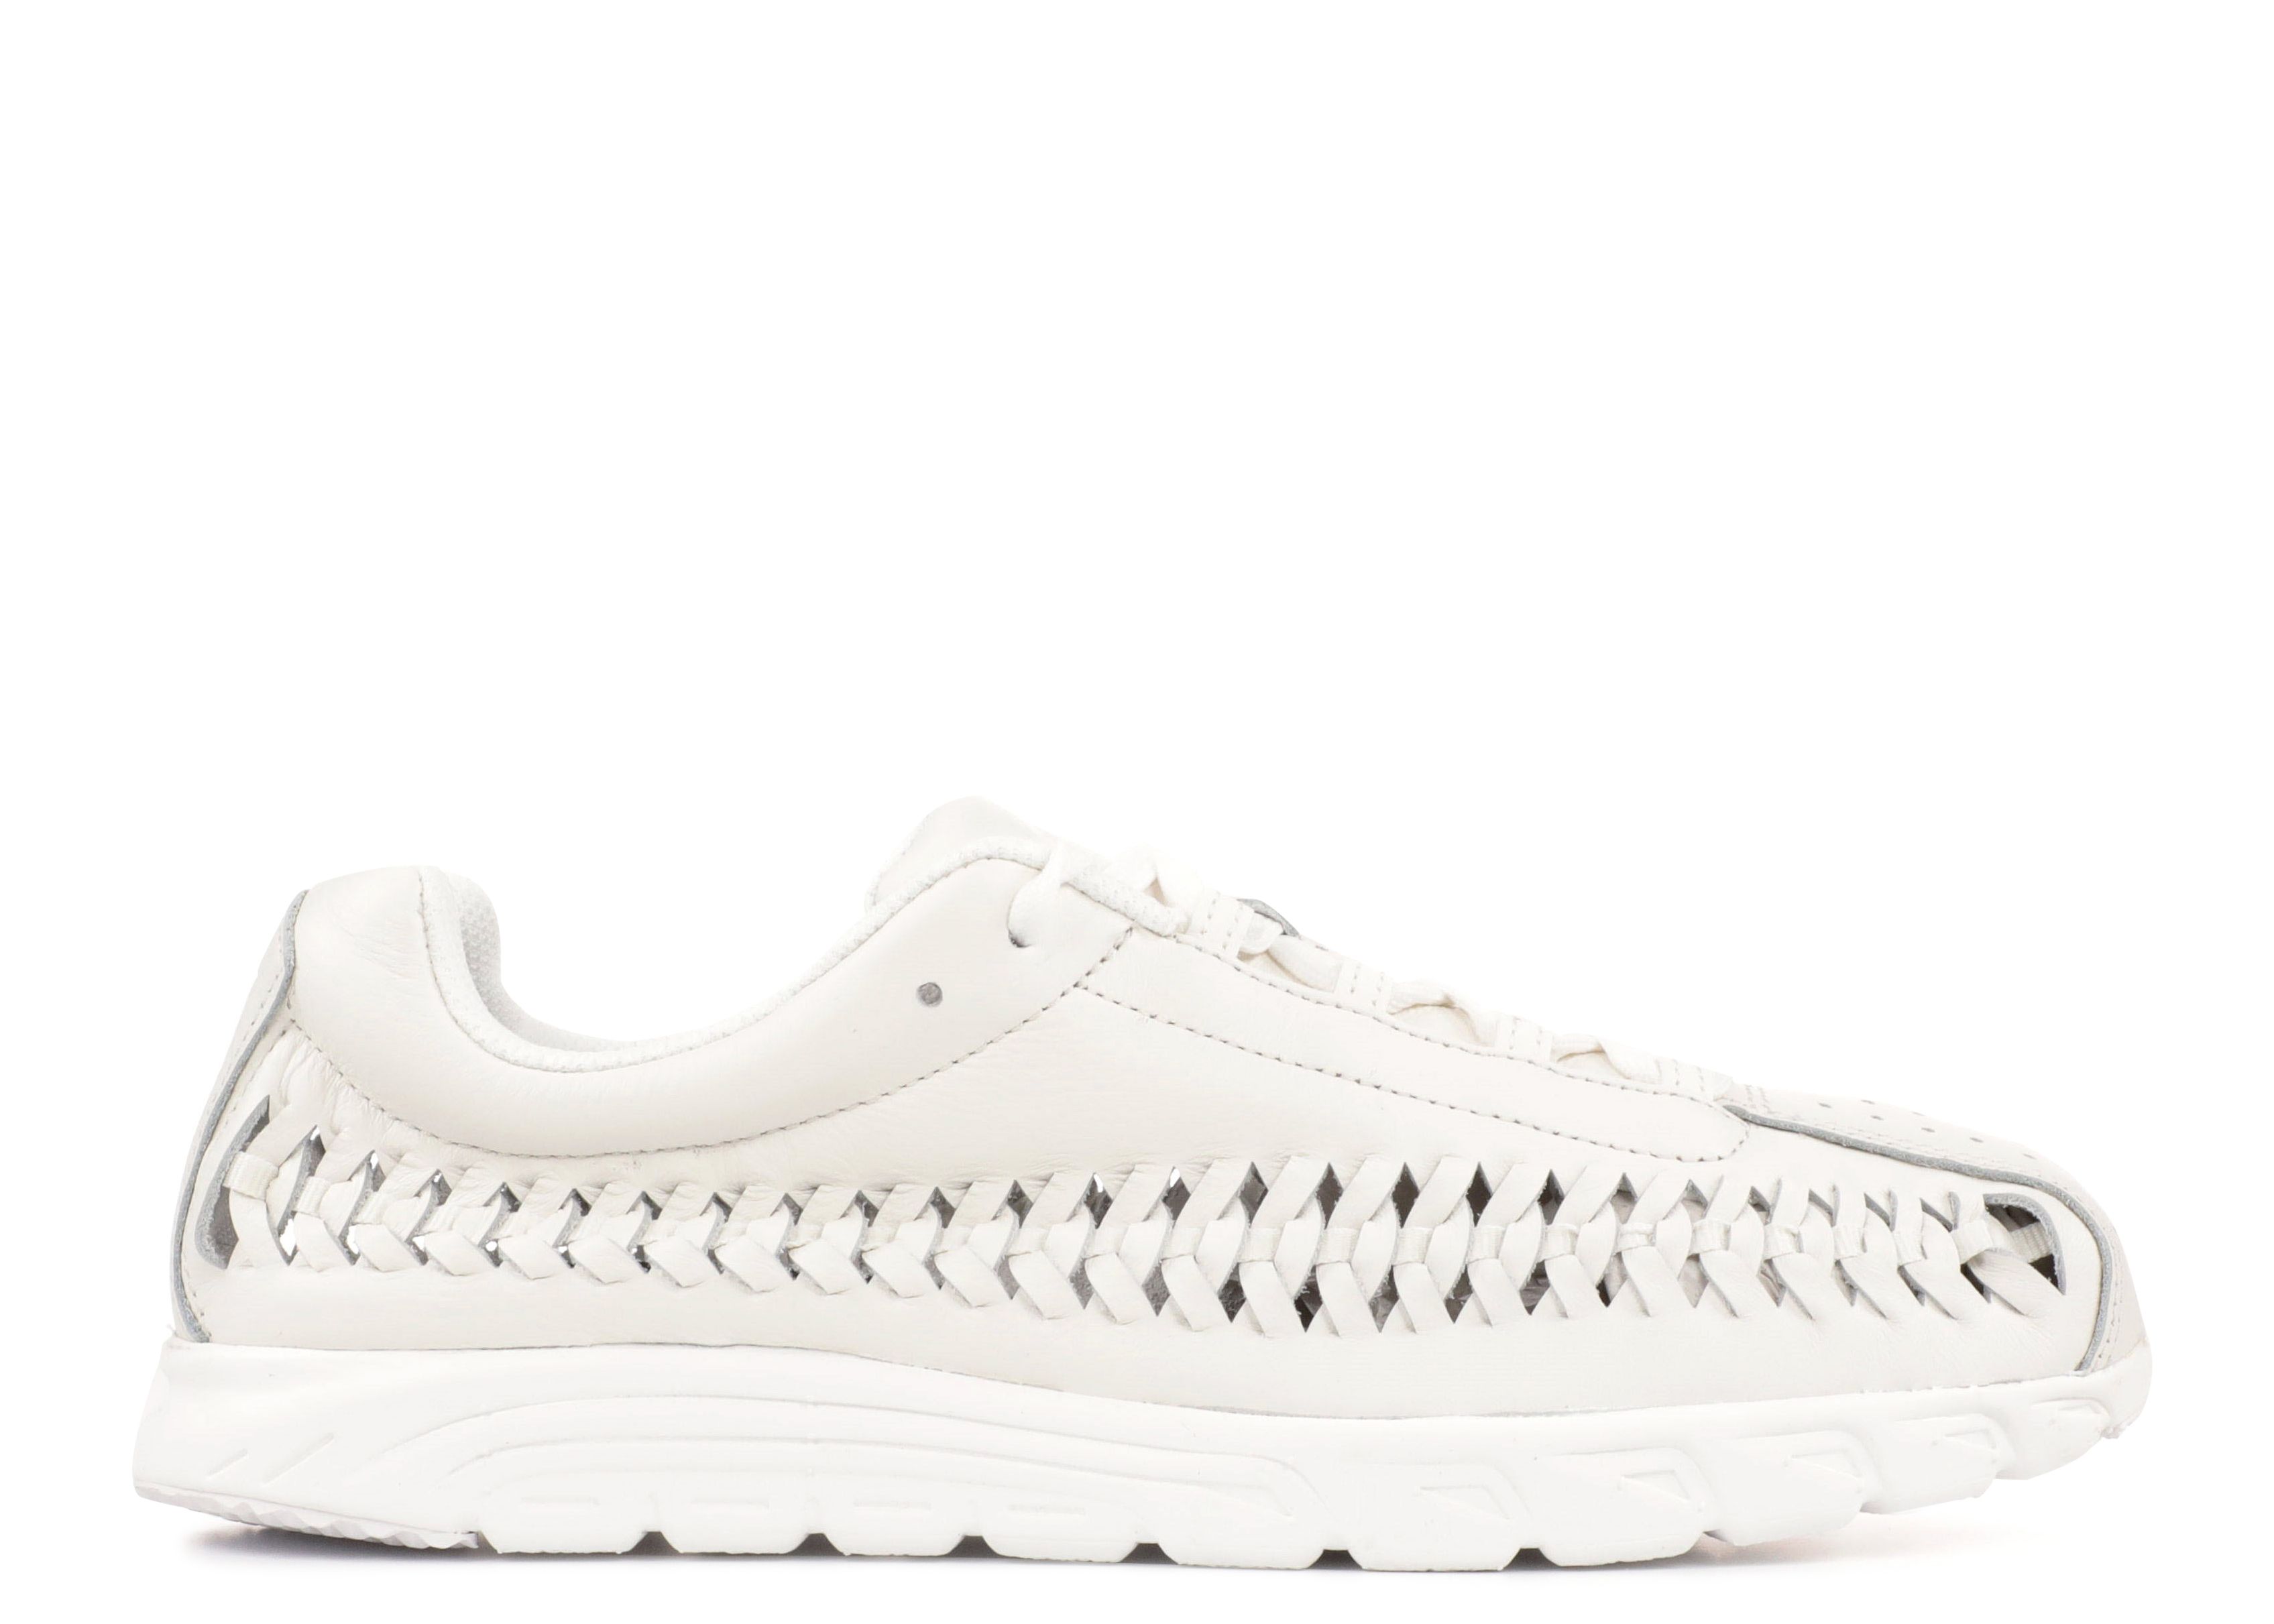 Mayfly Woven 'Independence Day' - Nike 